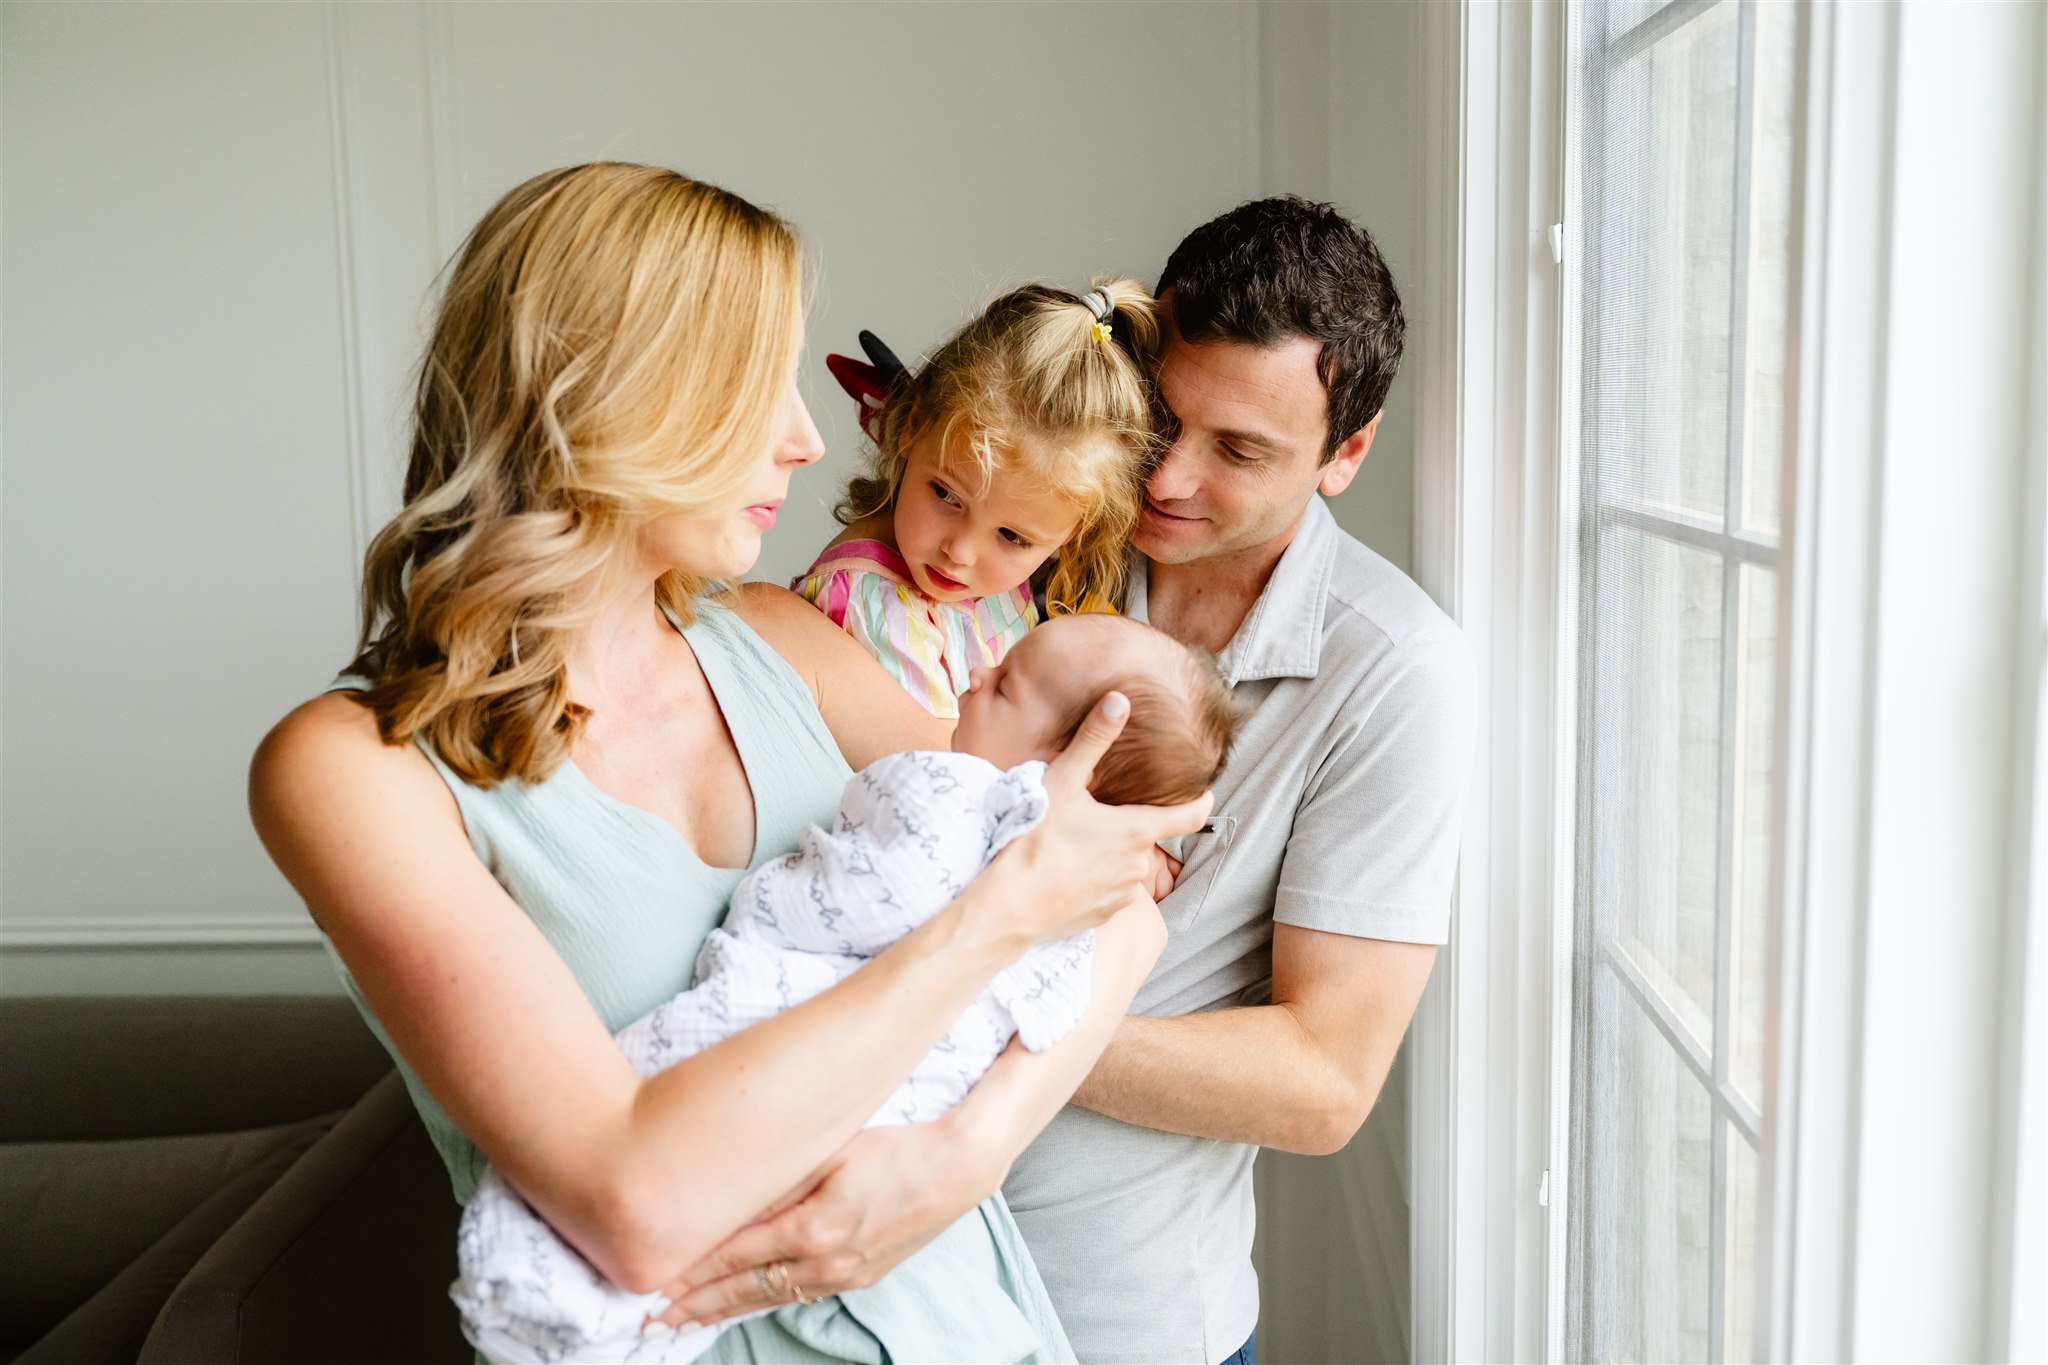 A mom and dad stand in a window holding their newborn baby and toddler daughter in their arms